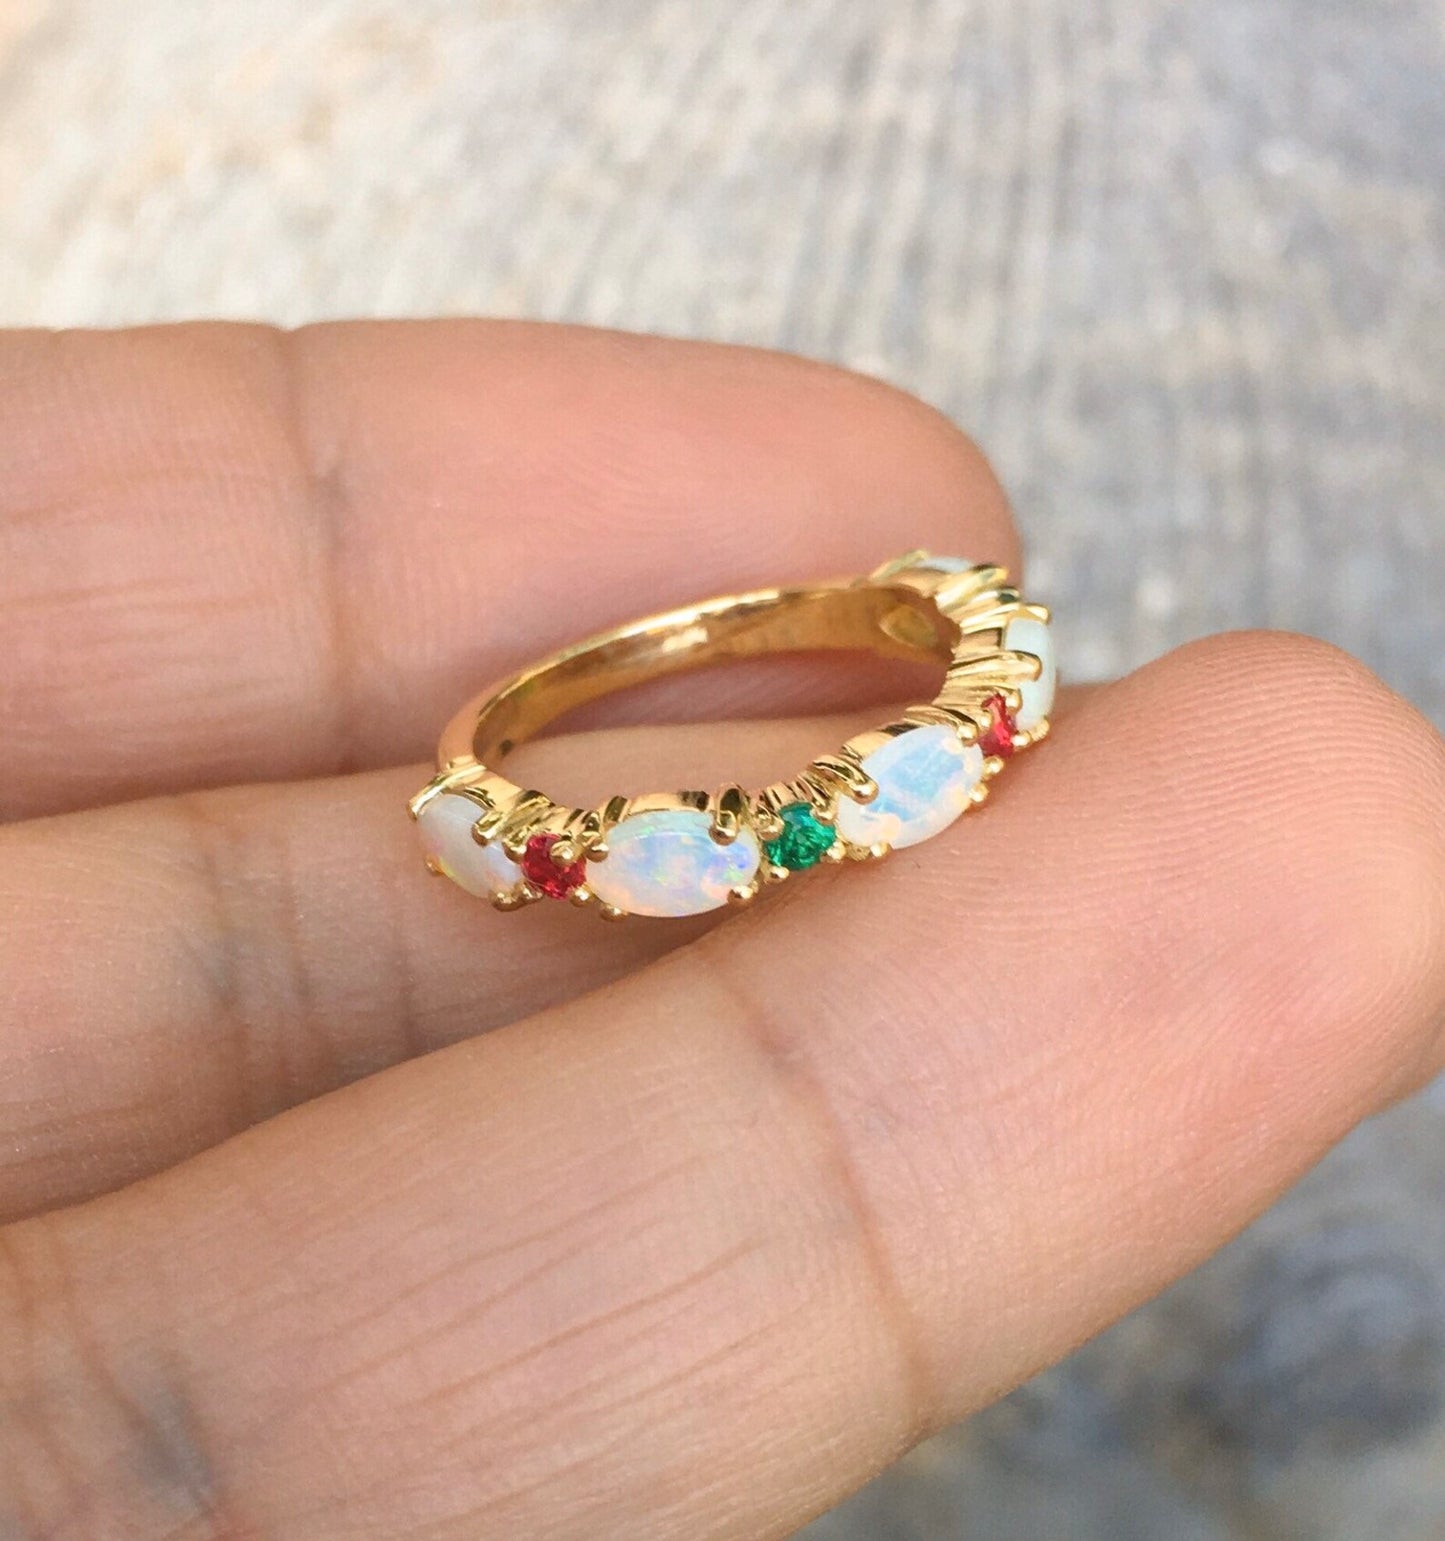 Oval Opal Ring with Emeralds and Rubies/ Alternating Opal Birthstone Stacking Ring/ Unique Opal Wedding Anniversary Ring/ Mothers Ring/ Holiday Fine Jewelry Gift